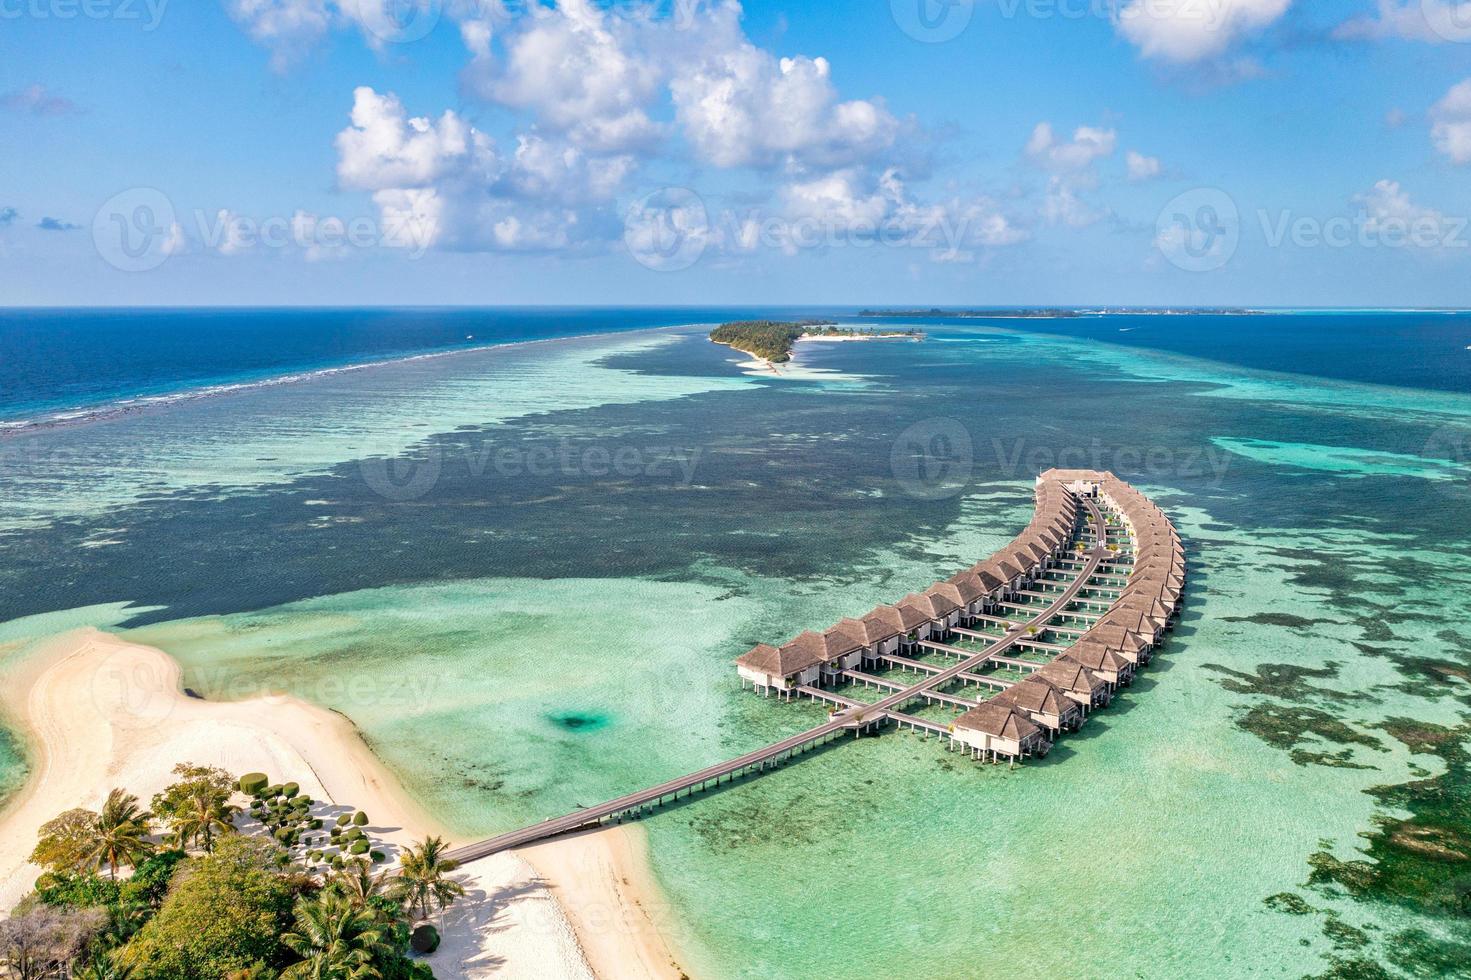 Fantastic aerial island landscape, luxury tropical resort or hotel with water villas and beautiful beach scenery. Amazing bird eyes view in Maldives, landscape seascape aerial view beautiful Maldives photo